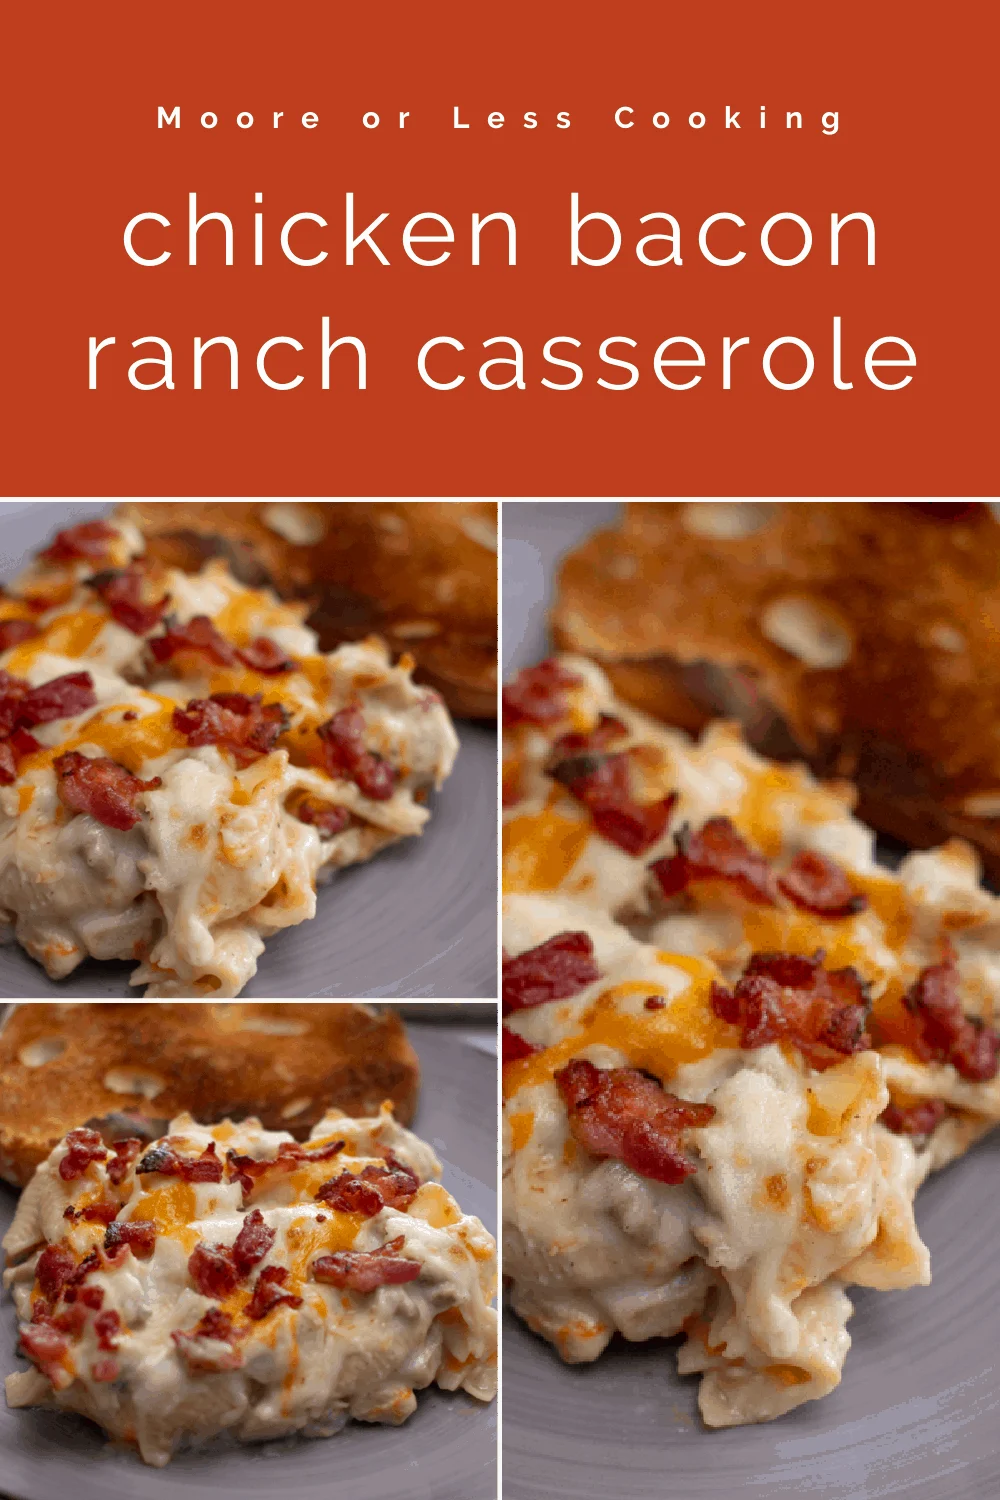 Chicken Bacon Ranch Casserole~This casserole literally is mouthwatering yummy and PACKED with flavor. Seasoned chicken, chopped up bacon, Alfredo sauce, and pasta…..what more could you ask for in one dish?? via @Mooreorlesscook